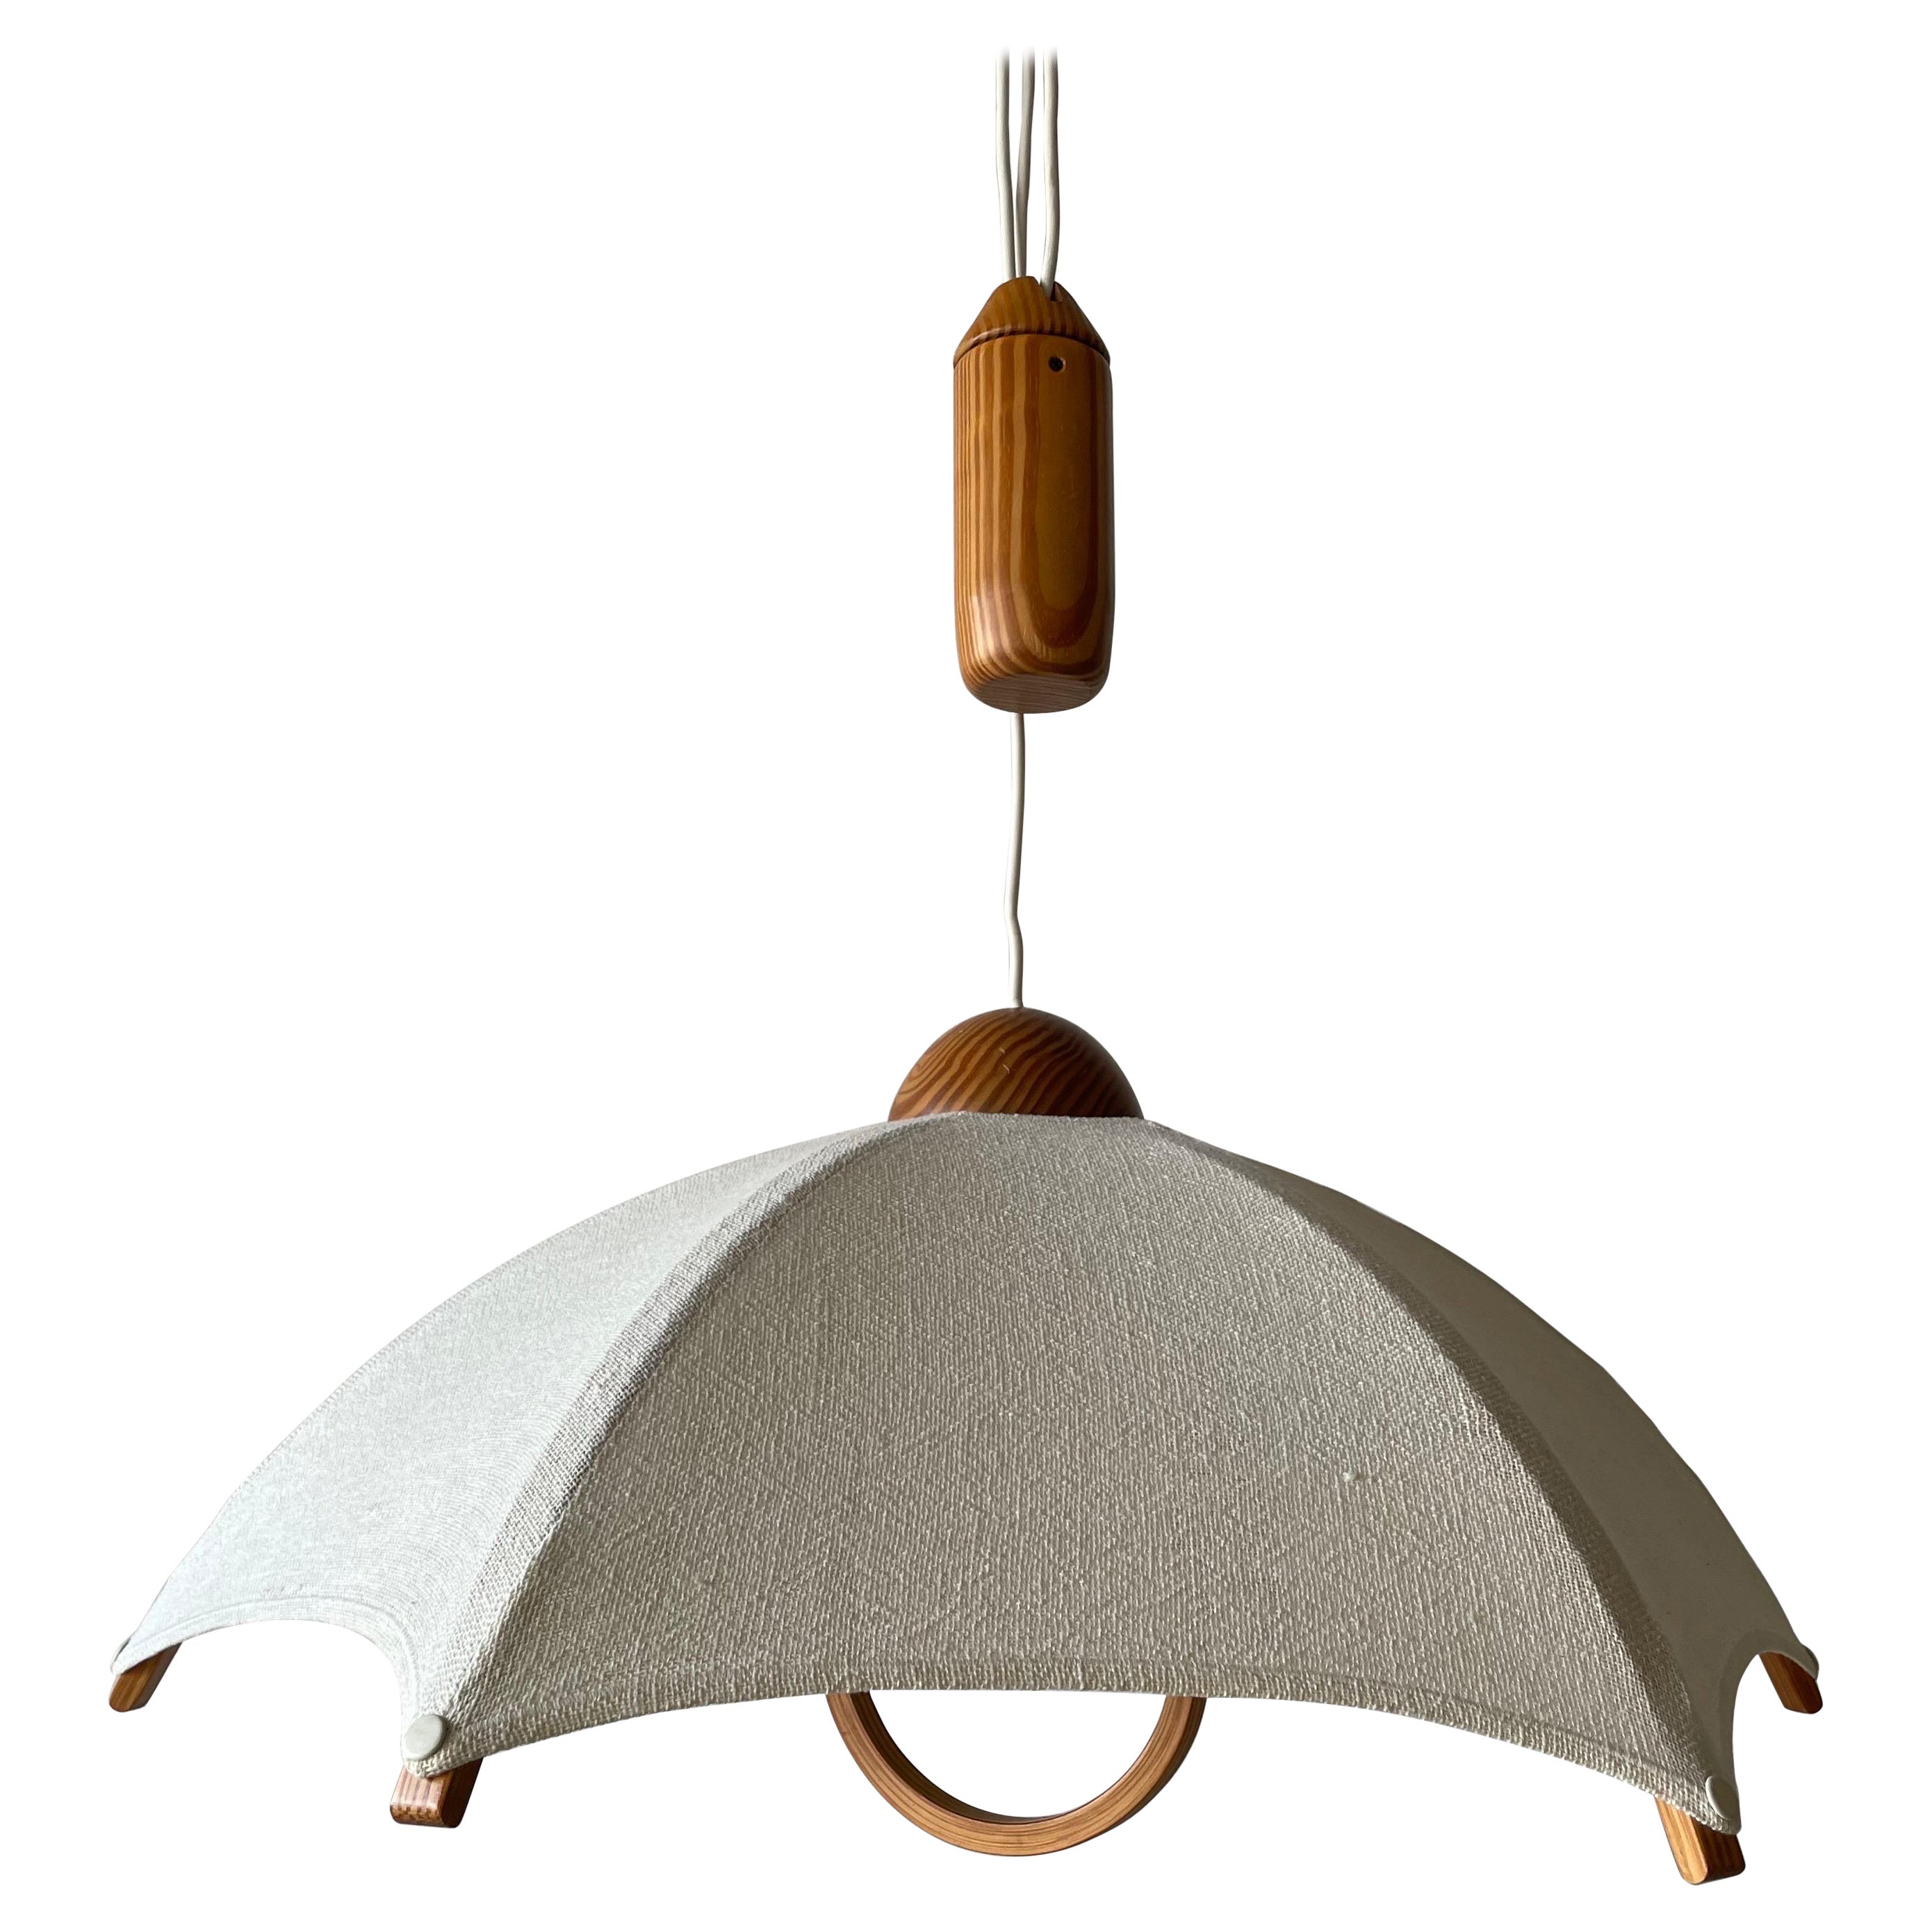 Wood & Fabric Shade Counterweight Pendant Lamp by Domus, 1980s, Italy